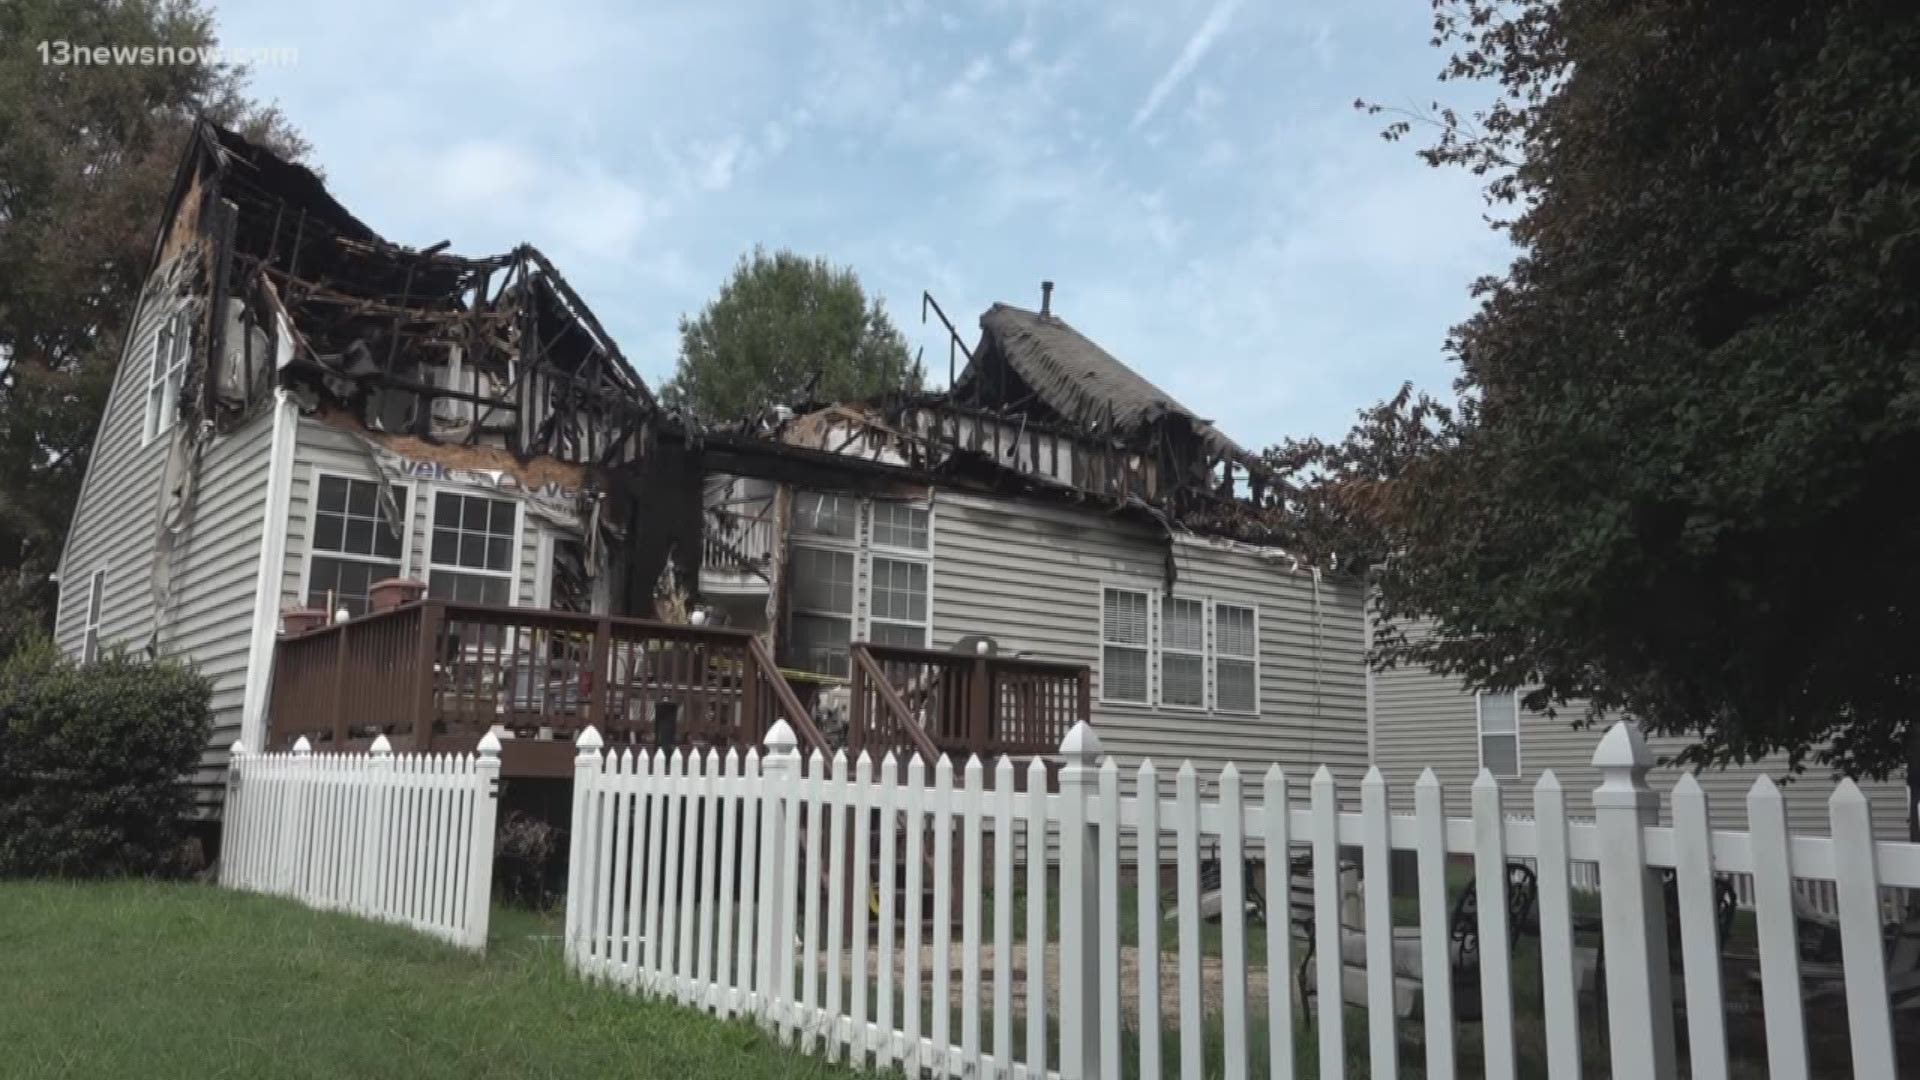 Neighbors are stepping in to help a James City County family after they lost everything in a house fire this week. The father has been active in the military for almost 30 years.